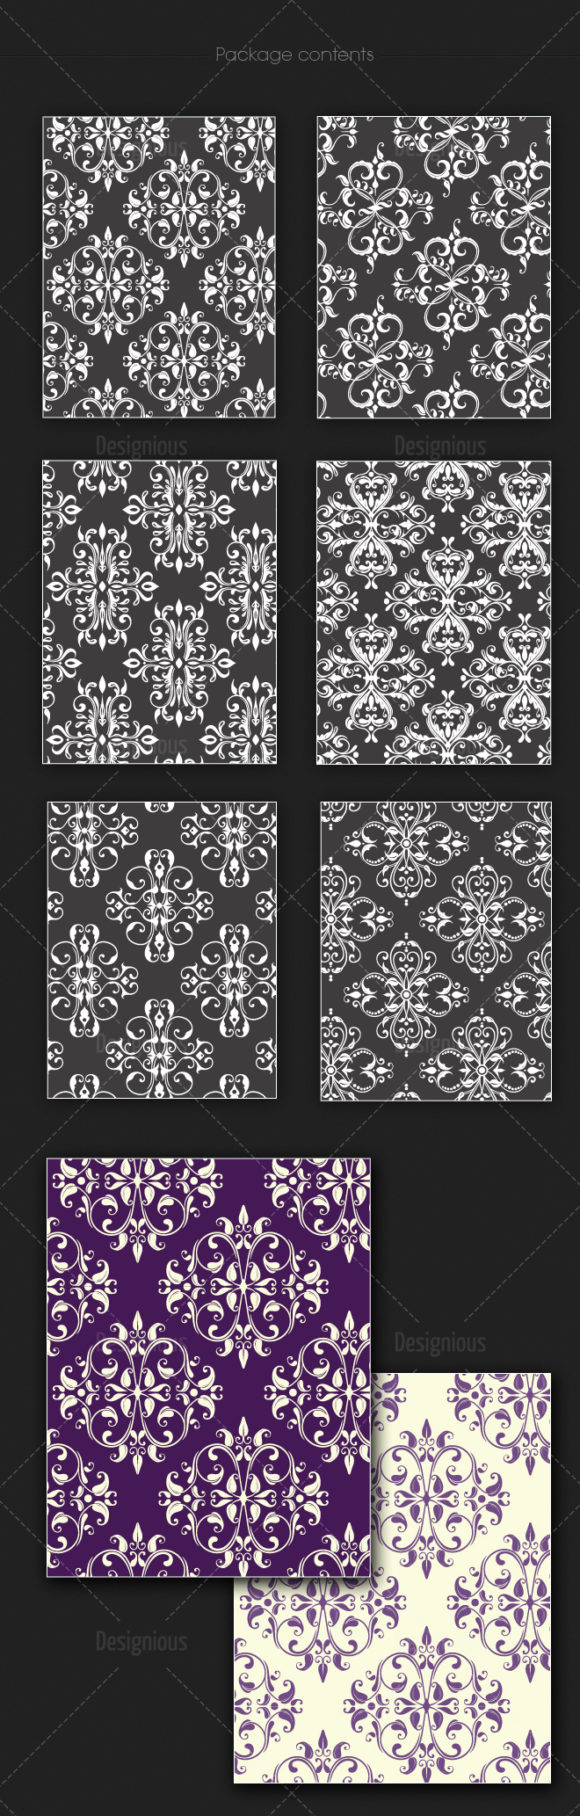 Seamless Patterns Vector Pack 130 2